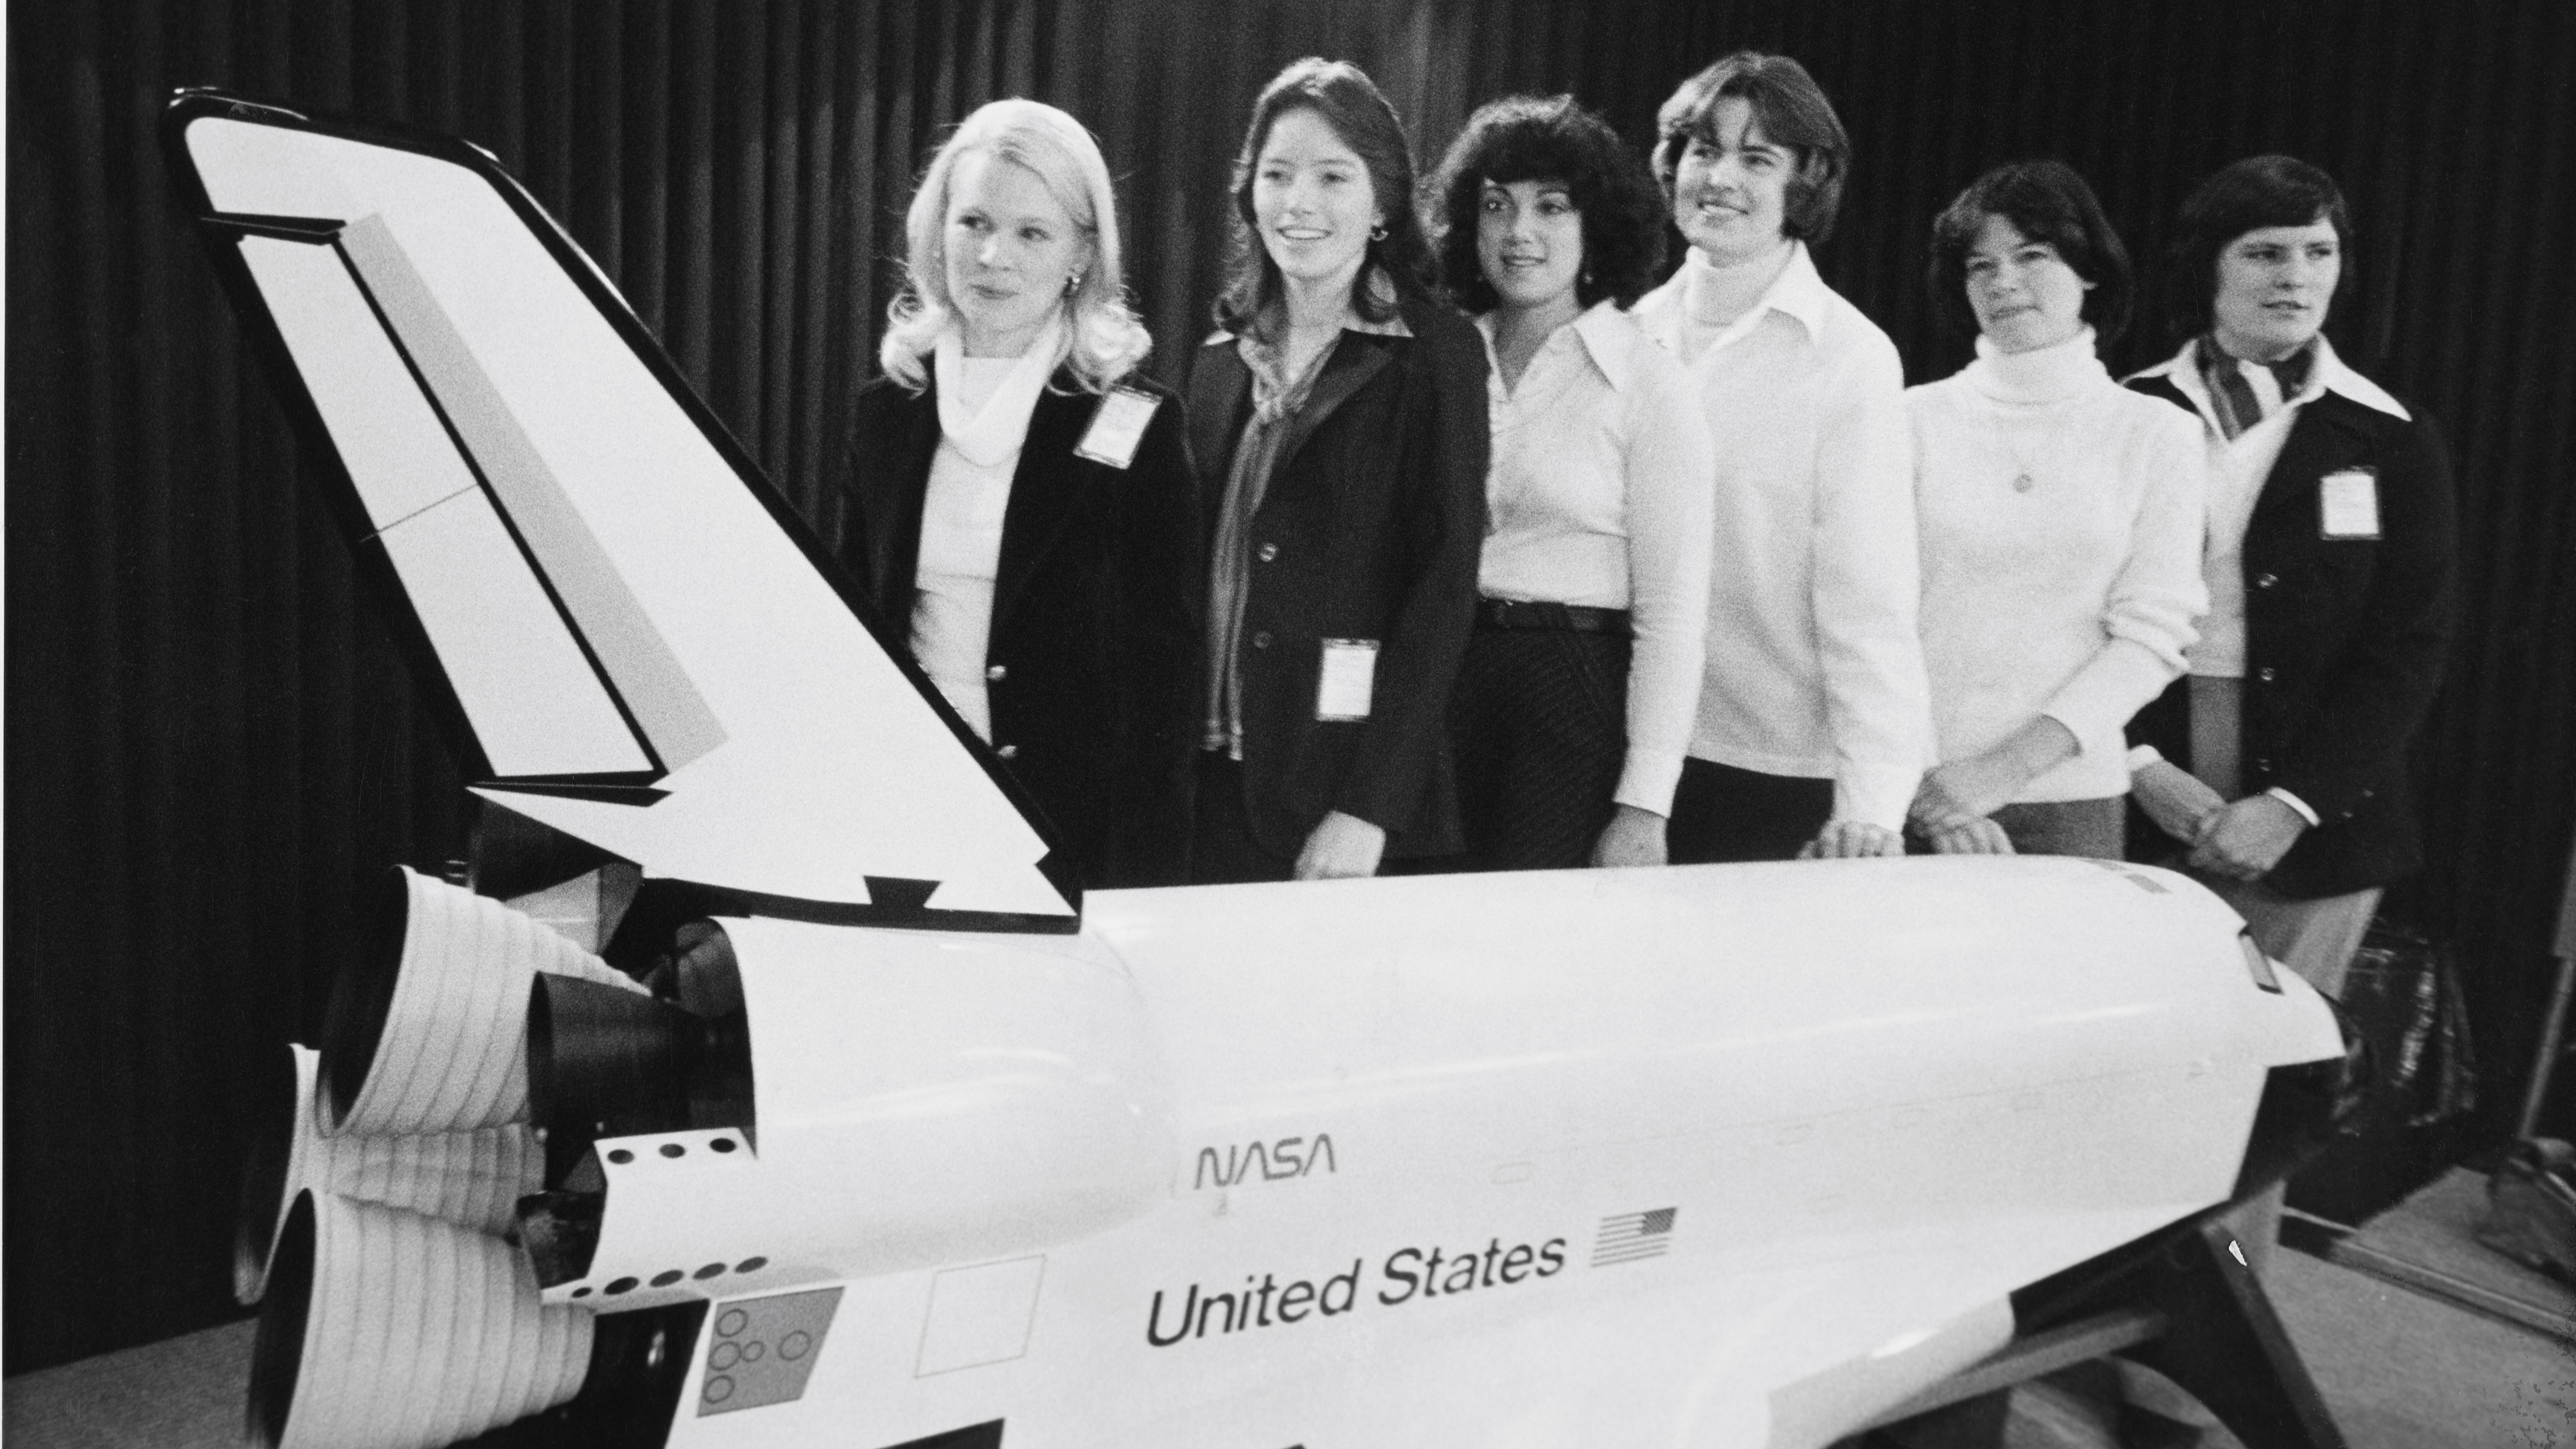 We asked over 50 women space leaders for words of inspiration. Here’s what they told us Space